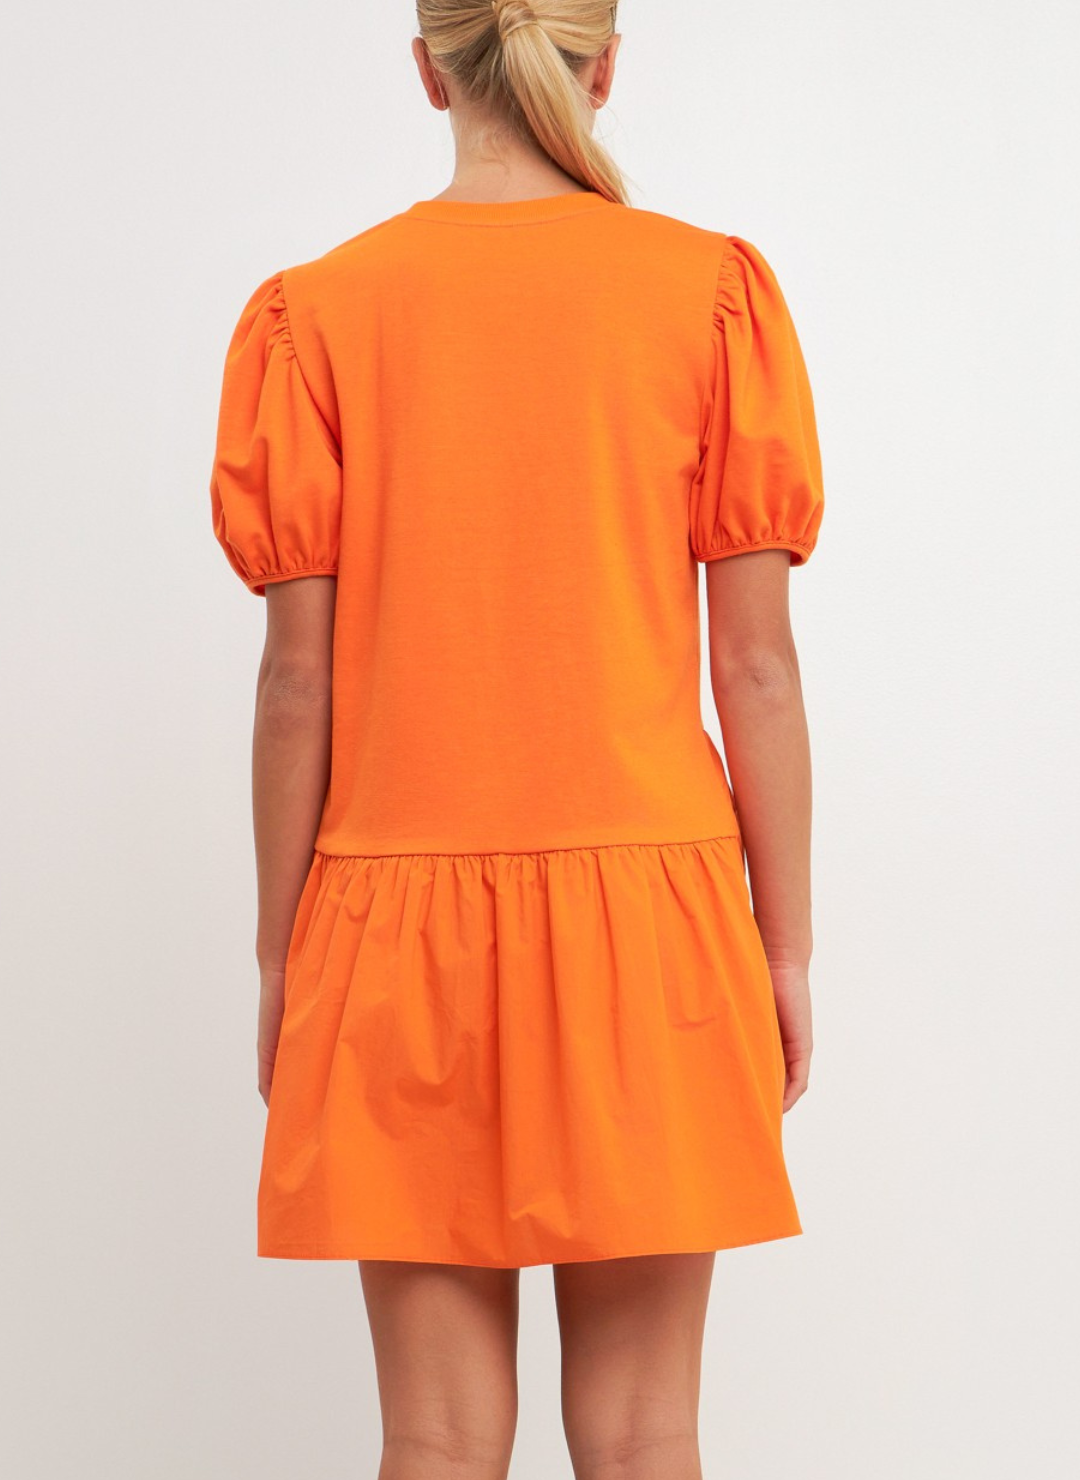 Back view of model wearing Orangesicle Delight Dress with short puffy sleeves, knit bodice, and cotton poplin. White background.